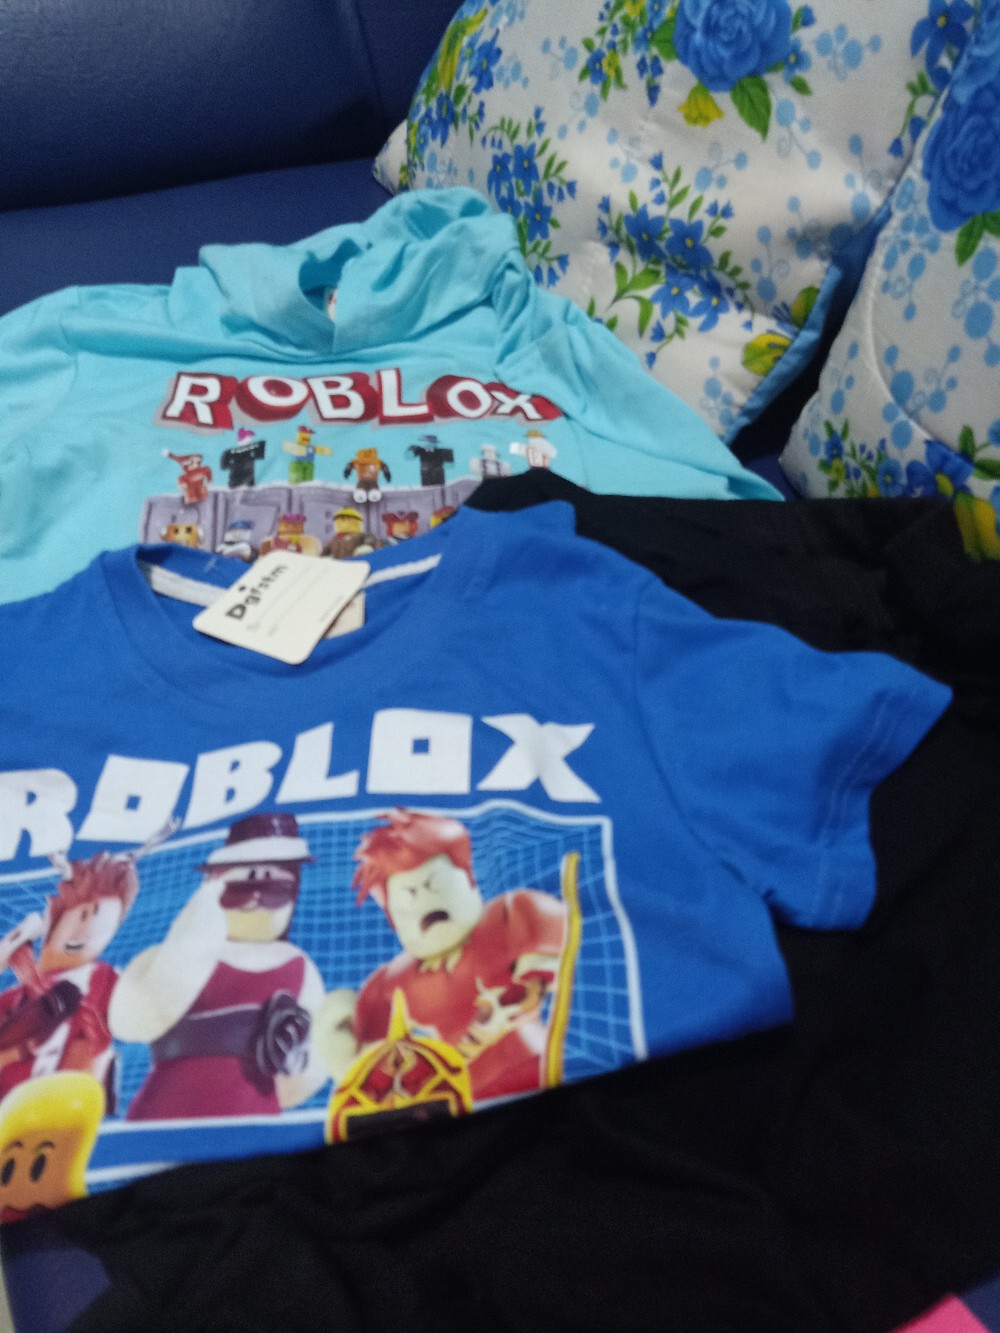 Roblox Kids T Shirts For Boys And Girls Tops Cartoon Tee Shirts Pure Cotton Shopee Philippines - kids 3d roblox games t shirt boys cartoon 3d funny print tee tops clothes girls t shirt clothing children costume for baby dx102